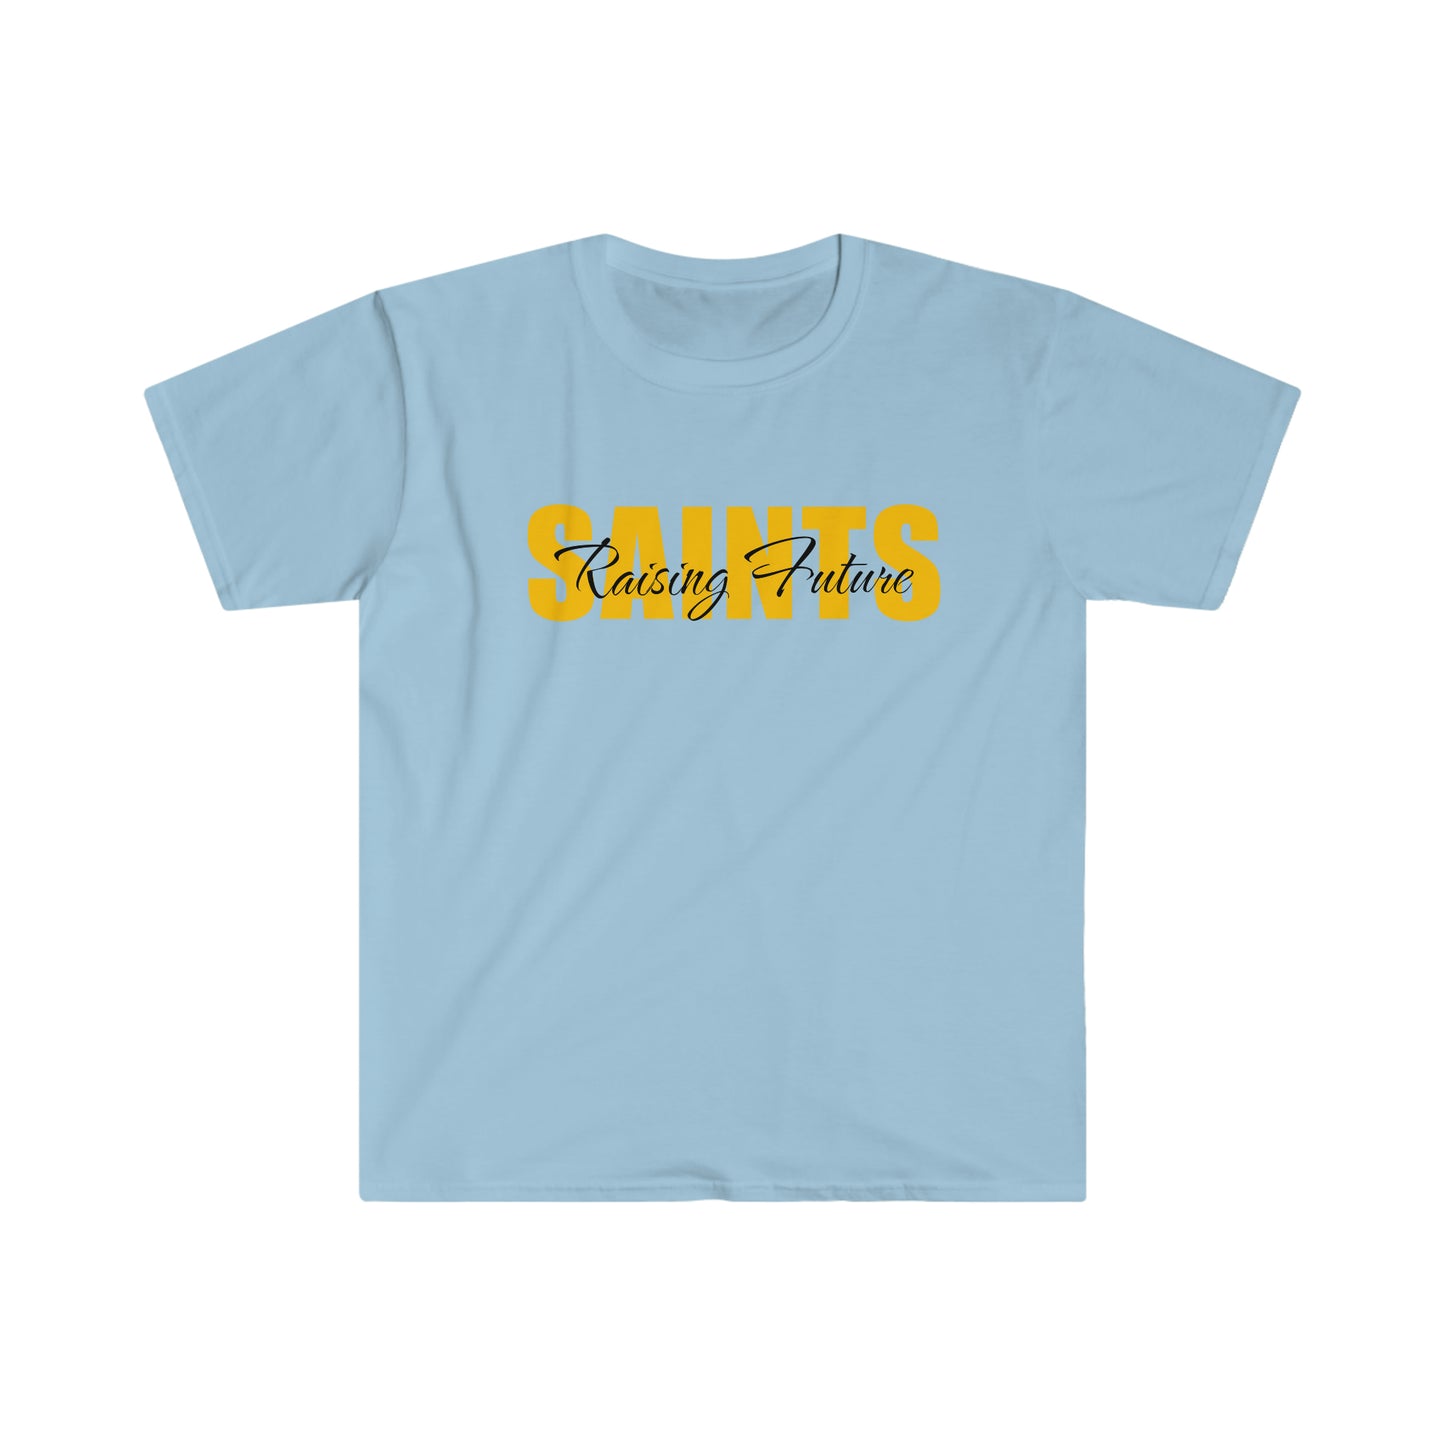 Light baby blue t-shirt with "Raising Future Saints" printed on it in complementary yellow and black colors.